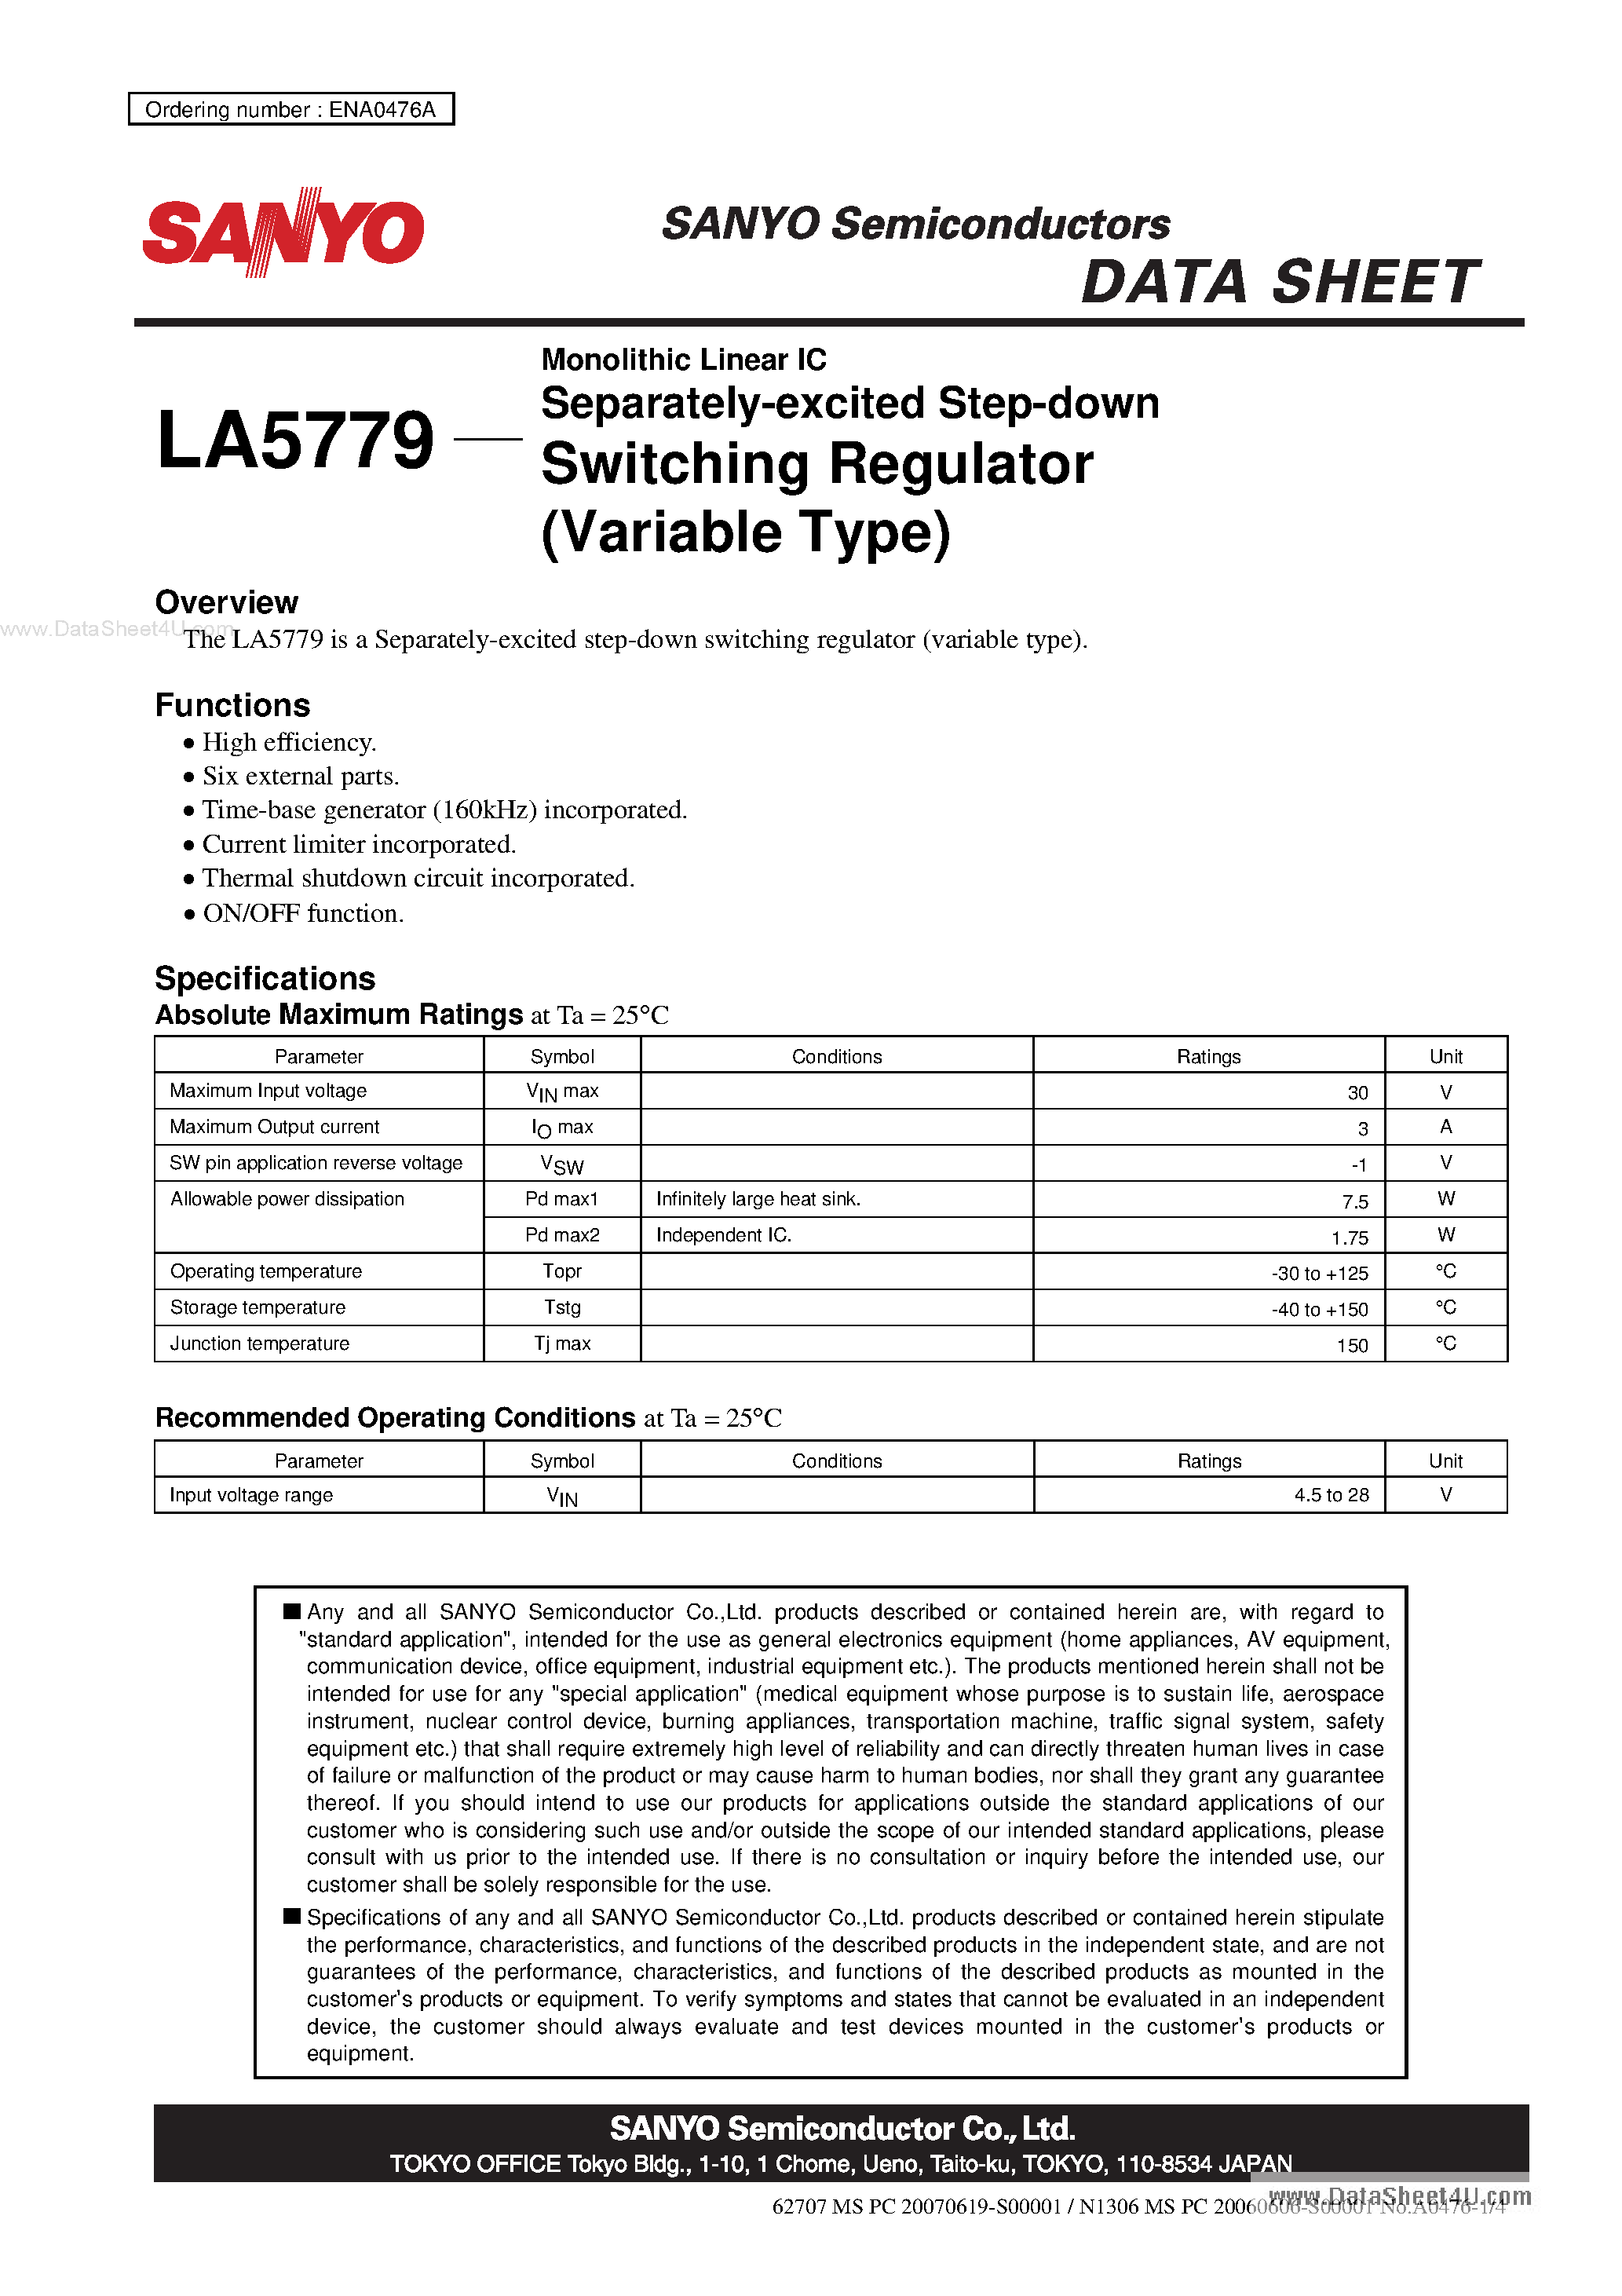 Datasheet LA5779 - Monolithic Linear IC Separately-excited Step-down Switching Regulator page 1